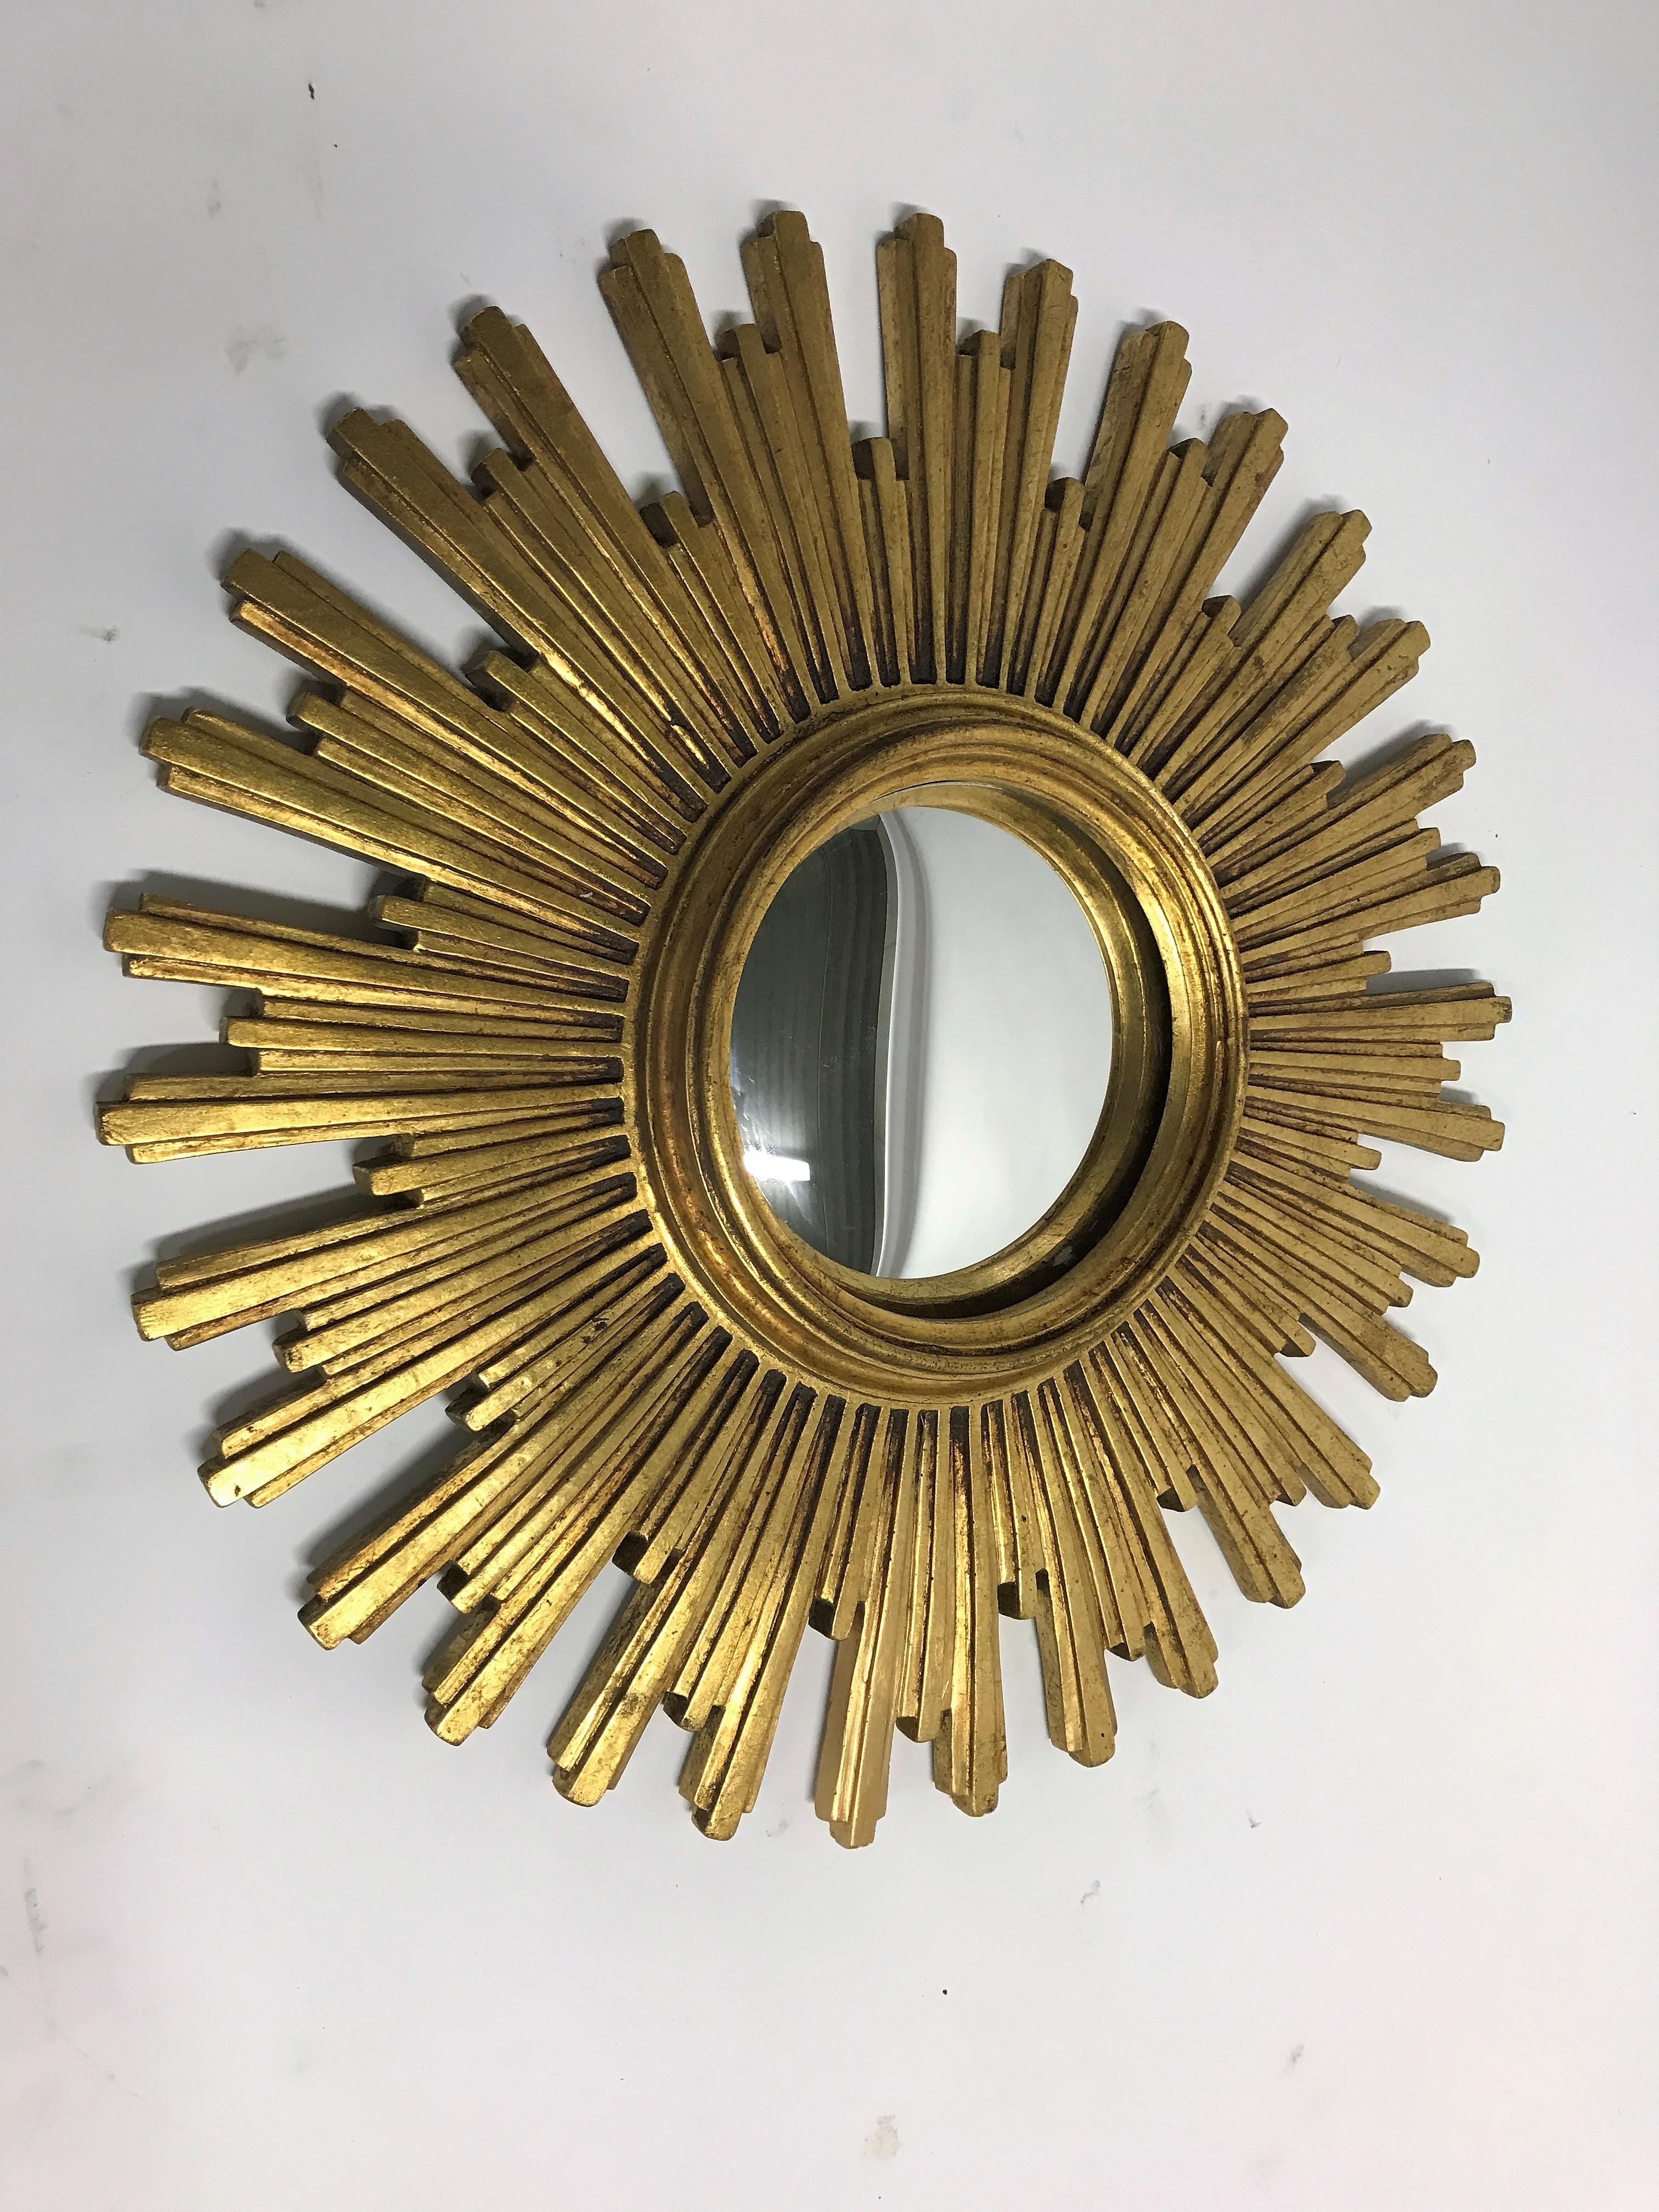 
Heavy gilded resin sunburst mirror with convex mirror glass.

The golden mirror is in a very good condition.

It has a near invisible repair on one of the 'sunrays'

1960s, made in Belgium.

Dimensions:
Diameter frame 54cm/21”
Diameter